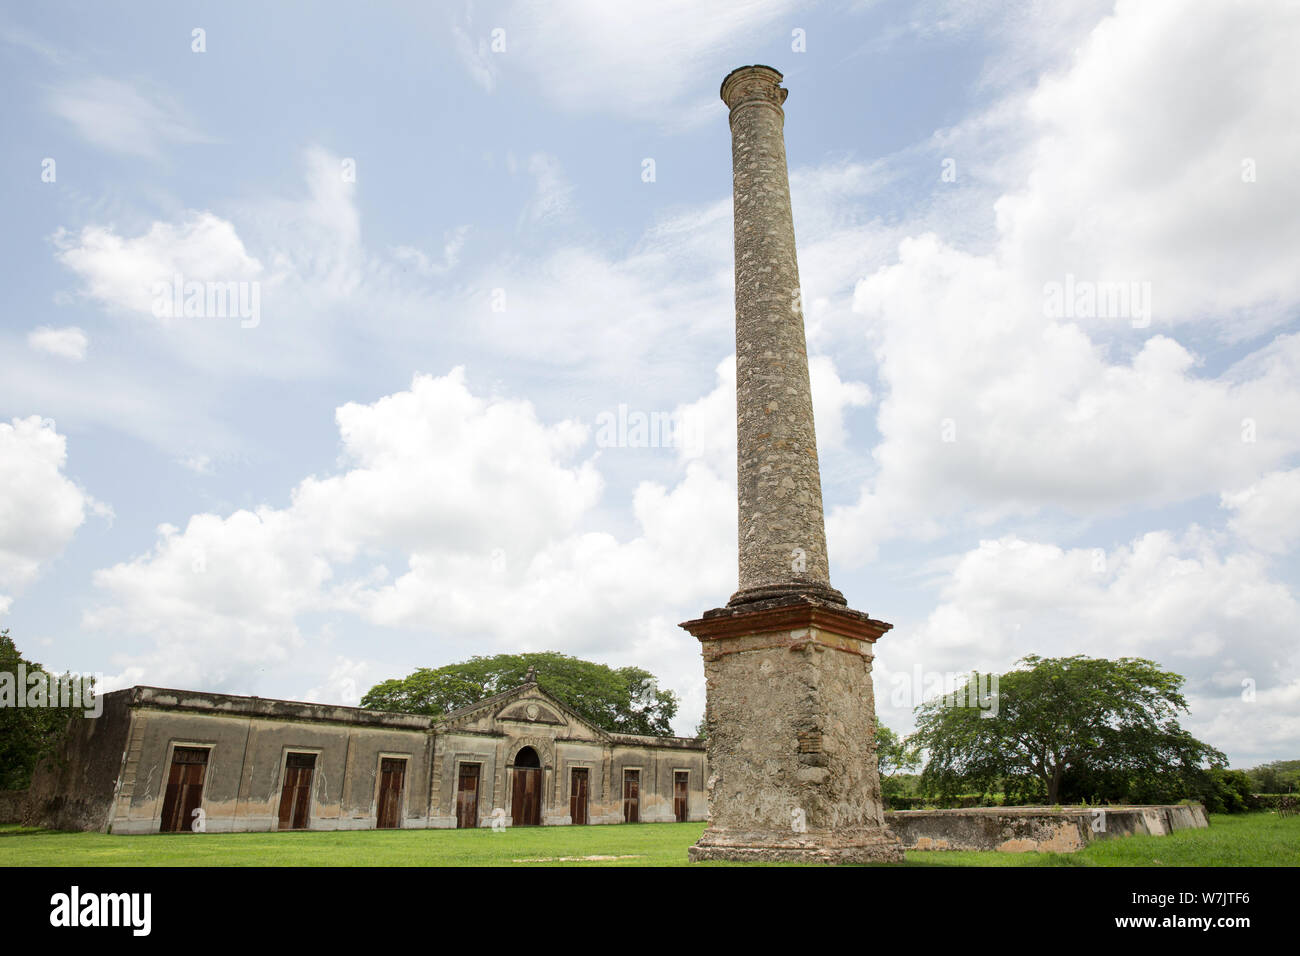 Chimney of the old henequen factory at Hacienda Yaxcopoil in the Uman Municipality, state of Yucatan, Mexico on July 22, 2019. Hacienda Yaxcopoil dates back to the 17th century and was once considered one of the most important rural estates in the Yucatan, spreading across 22,000 acres. It operated first as a cattle ranch and later as a henequen plantation during the golden age of the 'agave sisal'. Over time, due to continuous political, social and economic changes, the estate has been reduced to less than 3% of its original size. The production of henequen fiber in the hacienda ended in 1984 Stock Photo